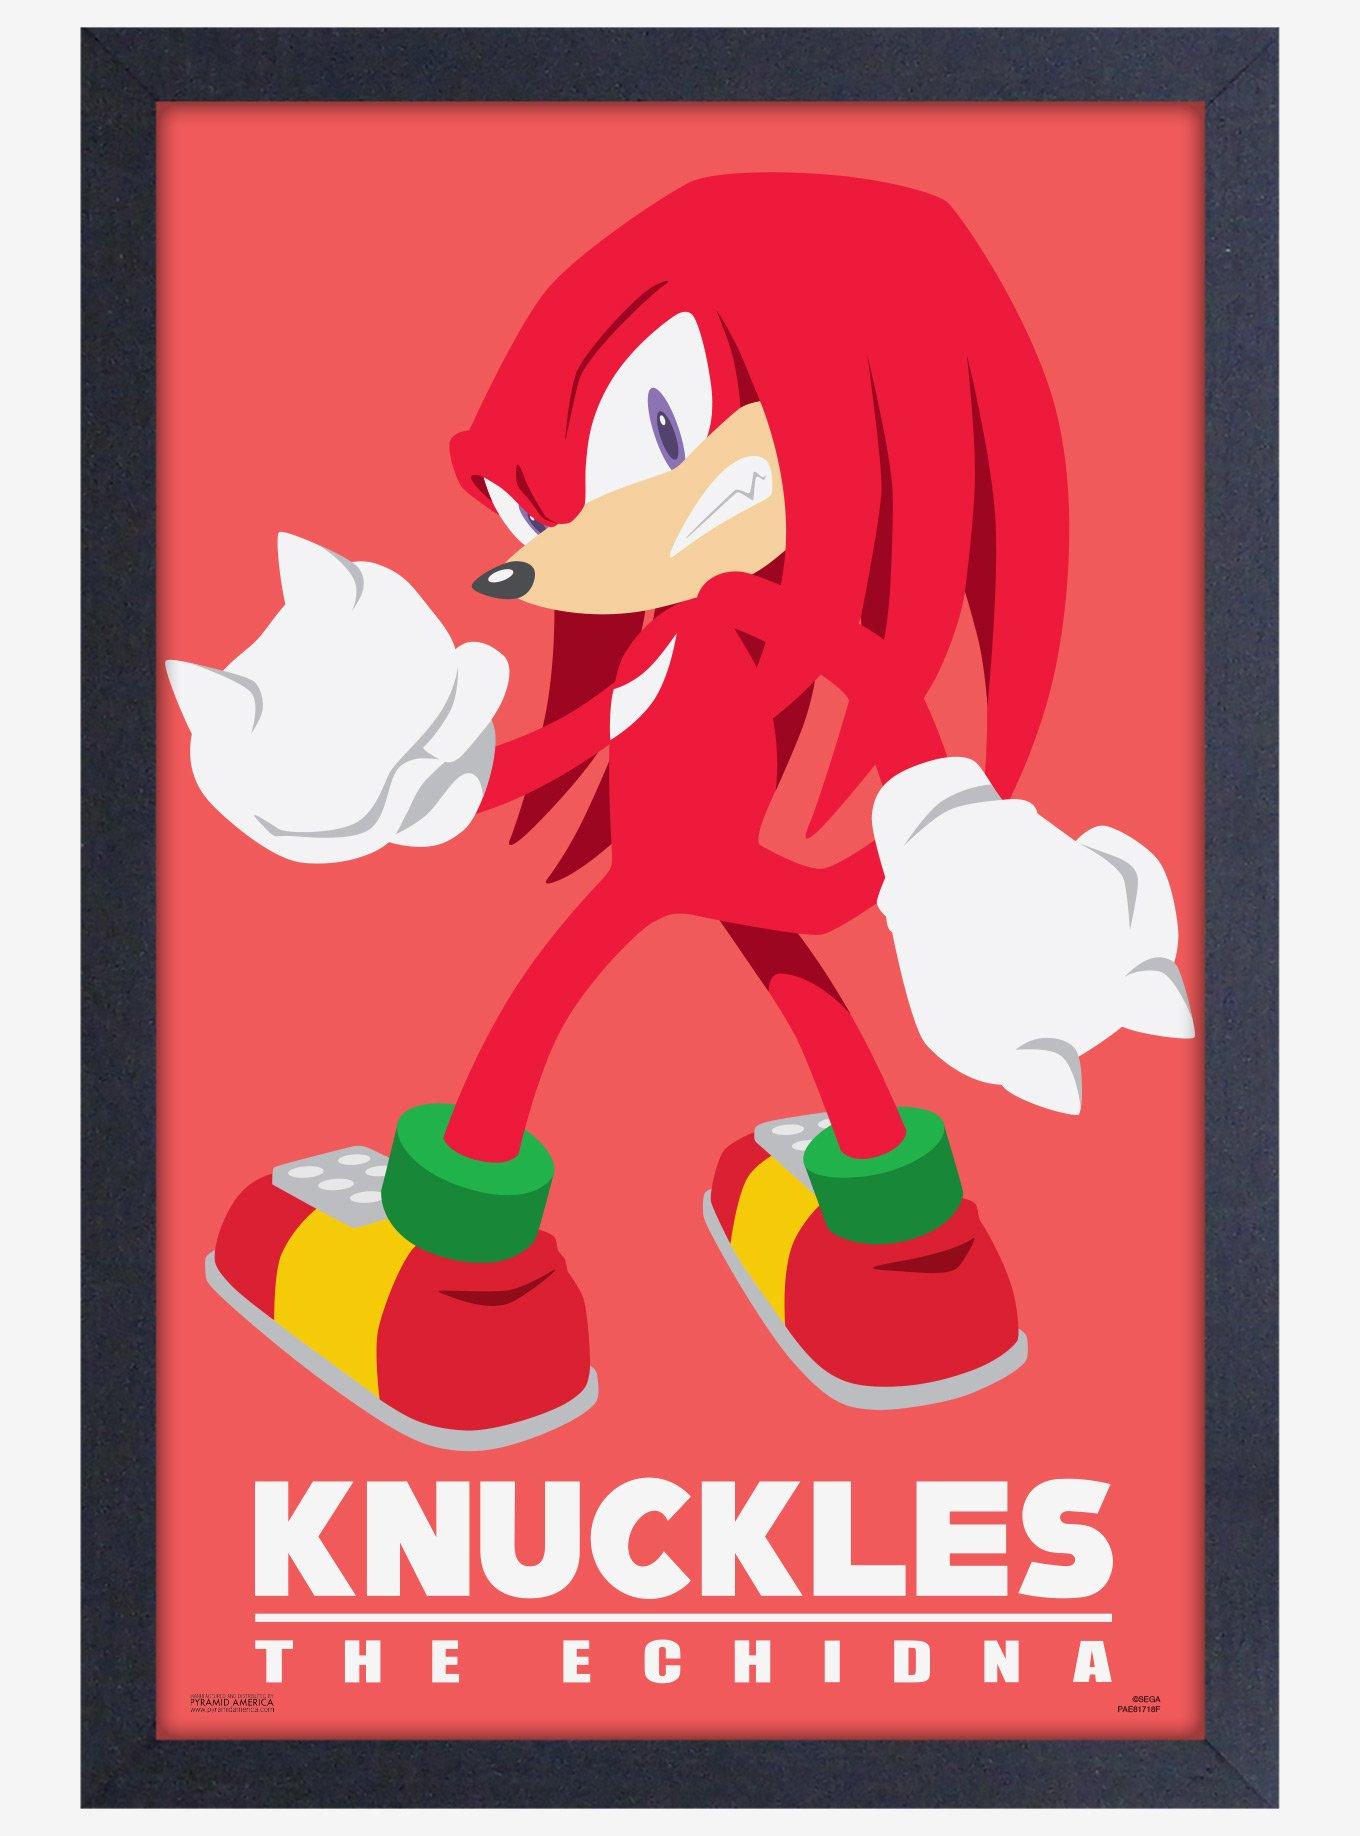 Sonic the Hedgehog 2' Character Posters Offer New Look At Knuckles